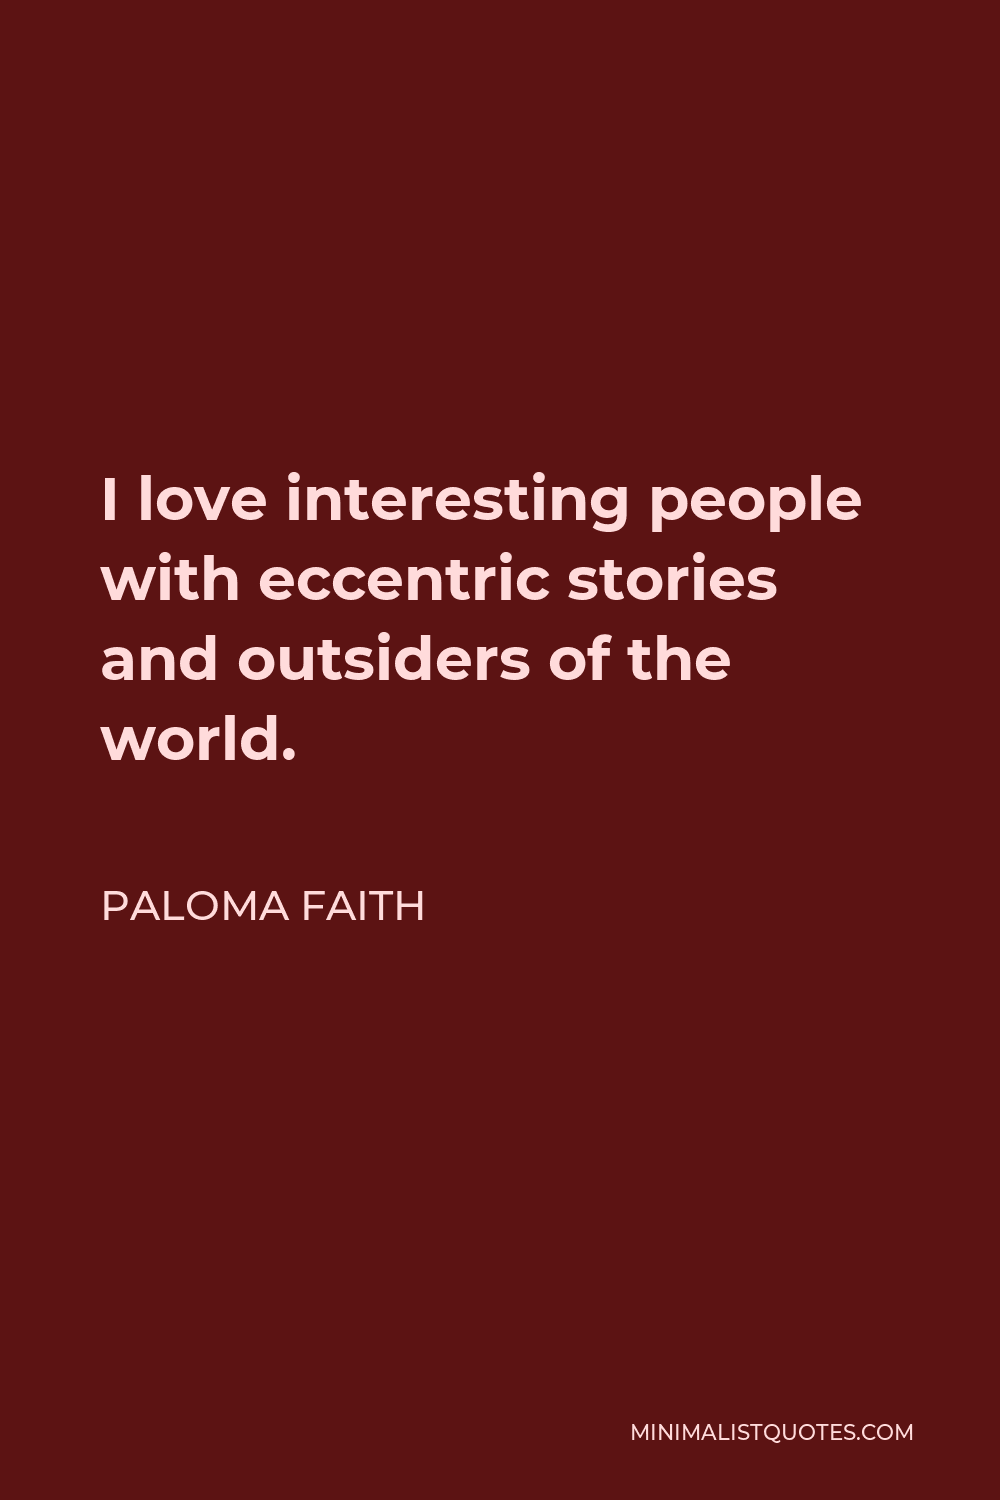 Paloma Faith Quote - I love interesting people with eccentric stories and outsiders of the world.